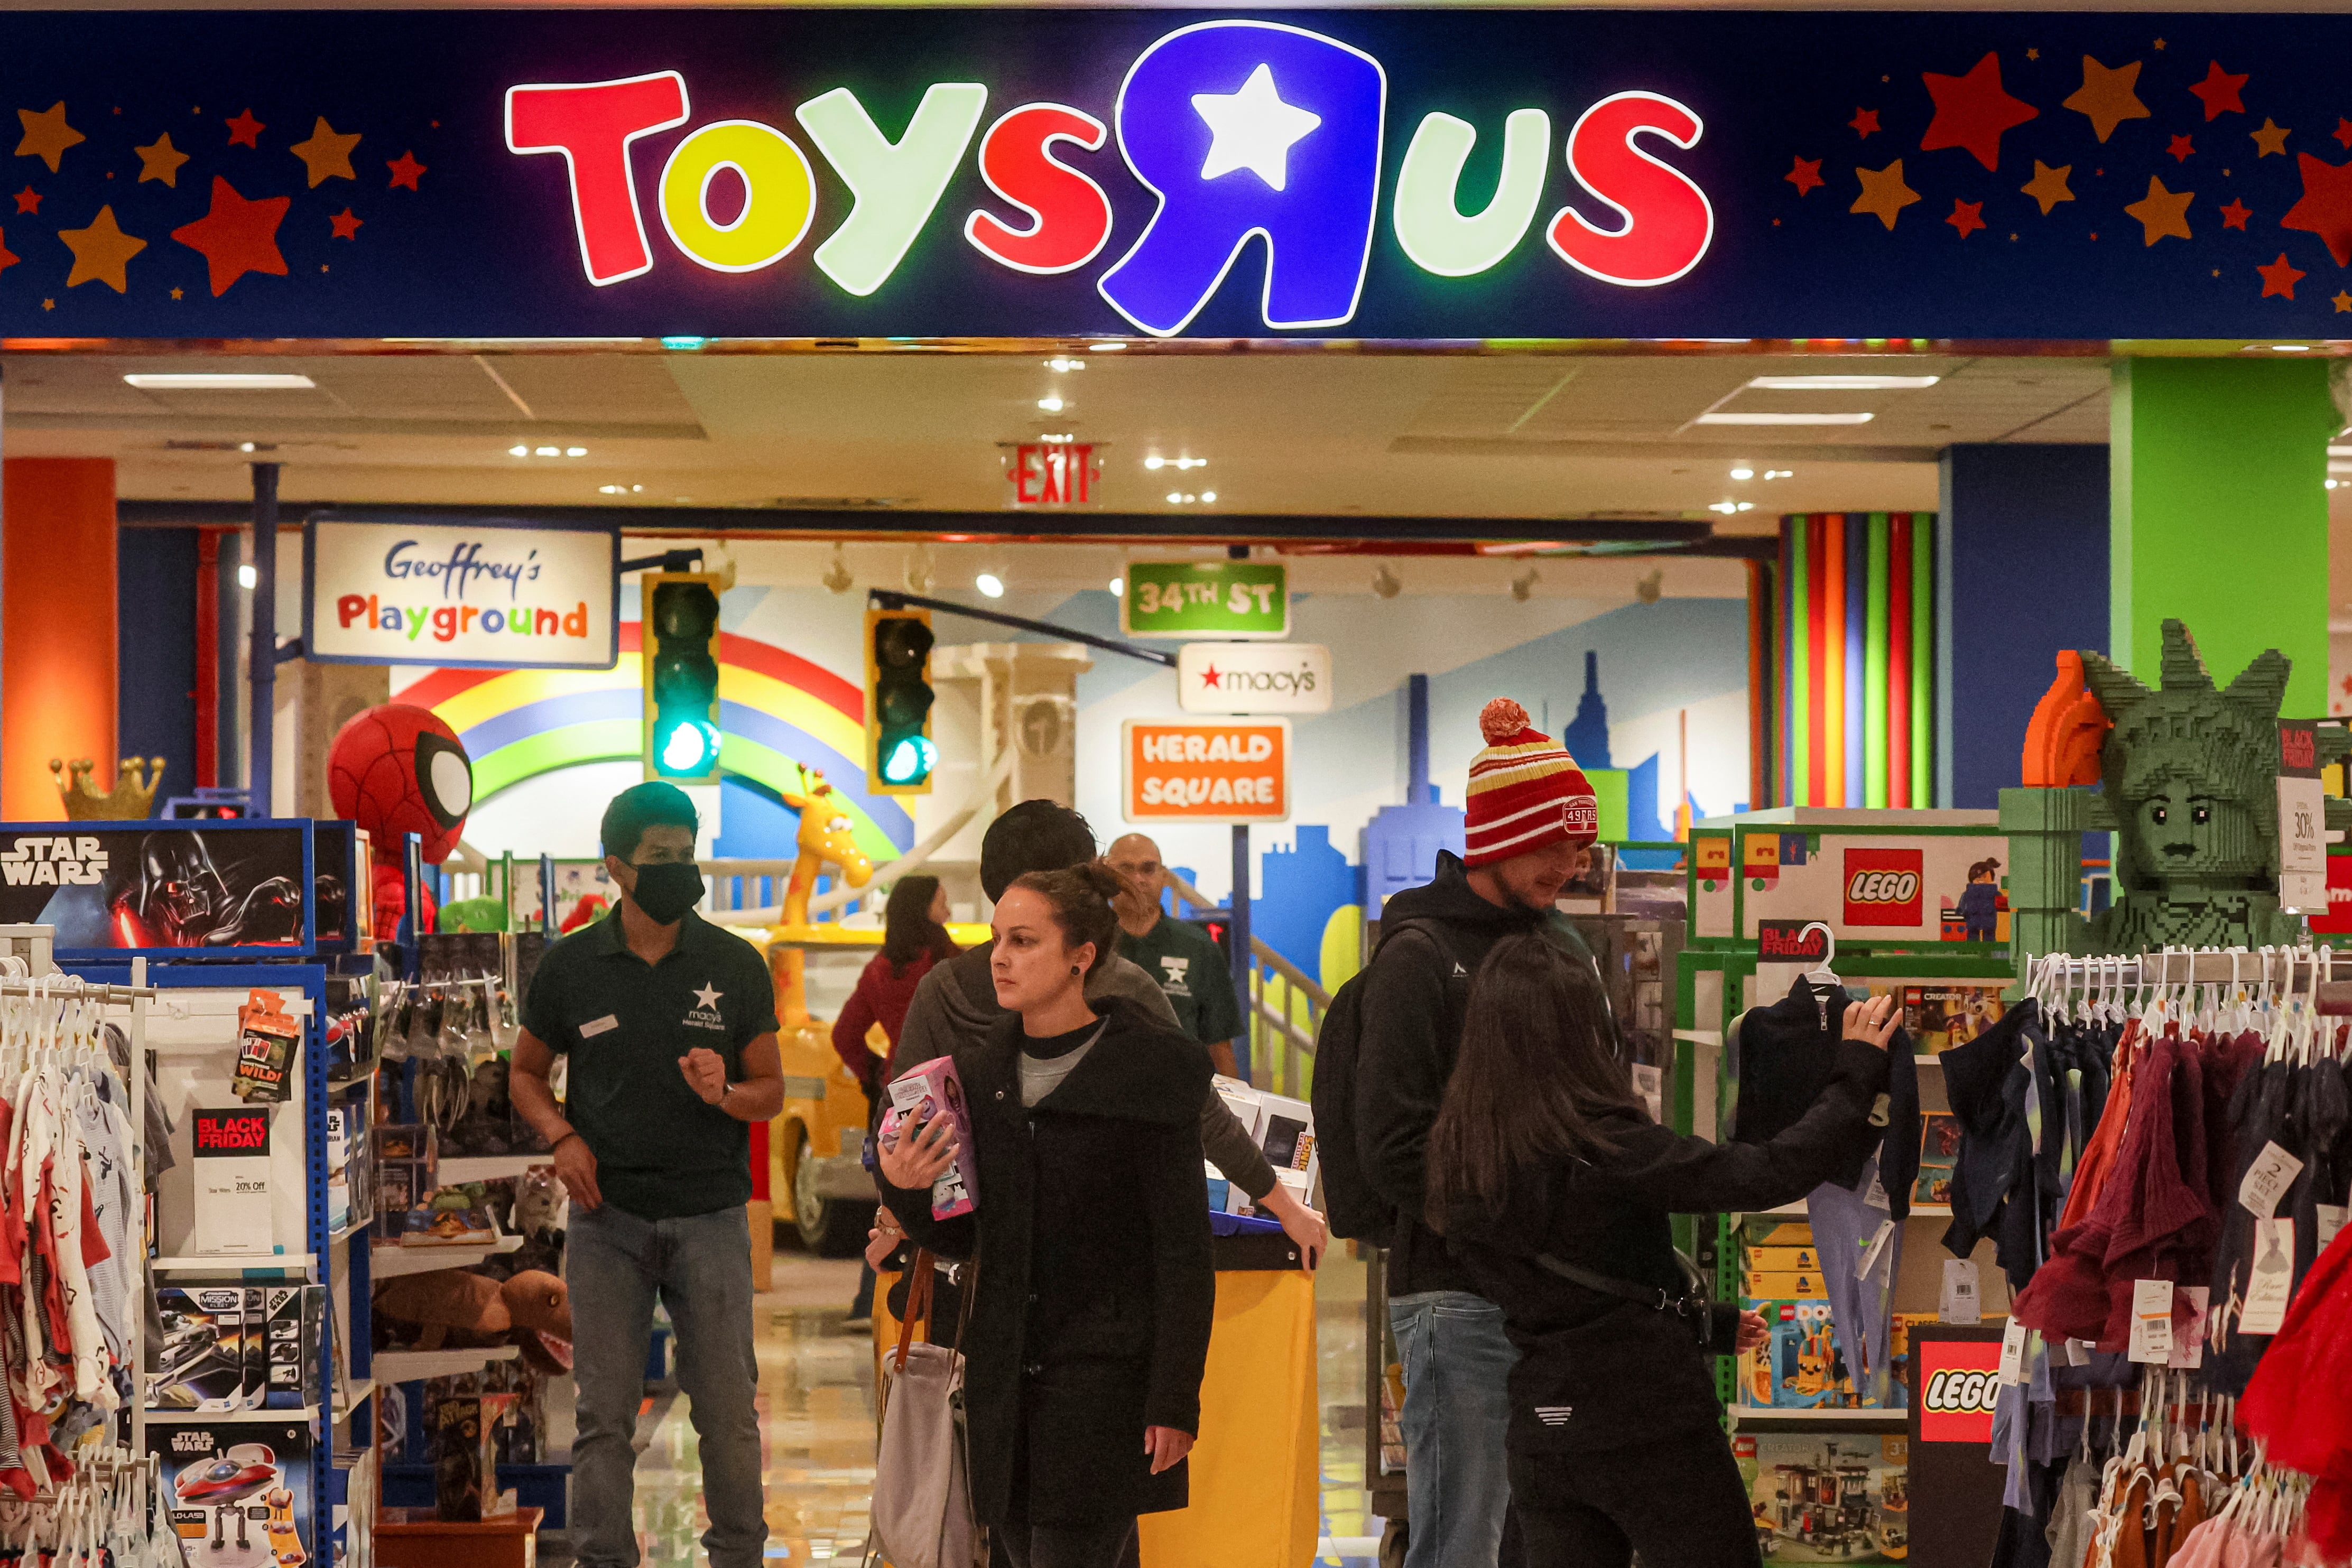 People shop at the Toys R Us store in Macy's Herald Square during Black Friday sales in New York City, U.S., November 25, 2022. REUTERS/Brendan McDermid